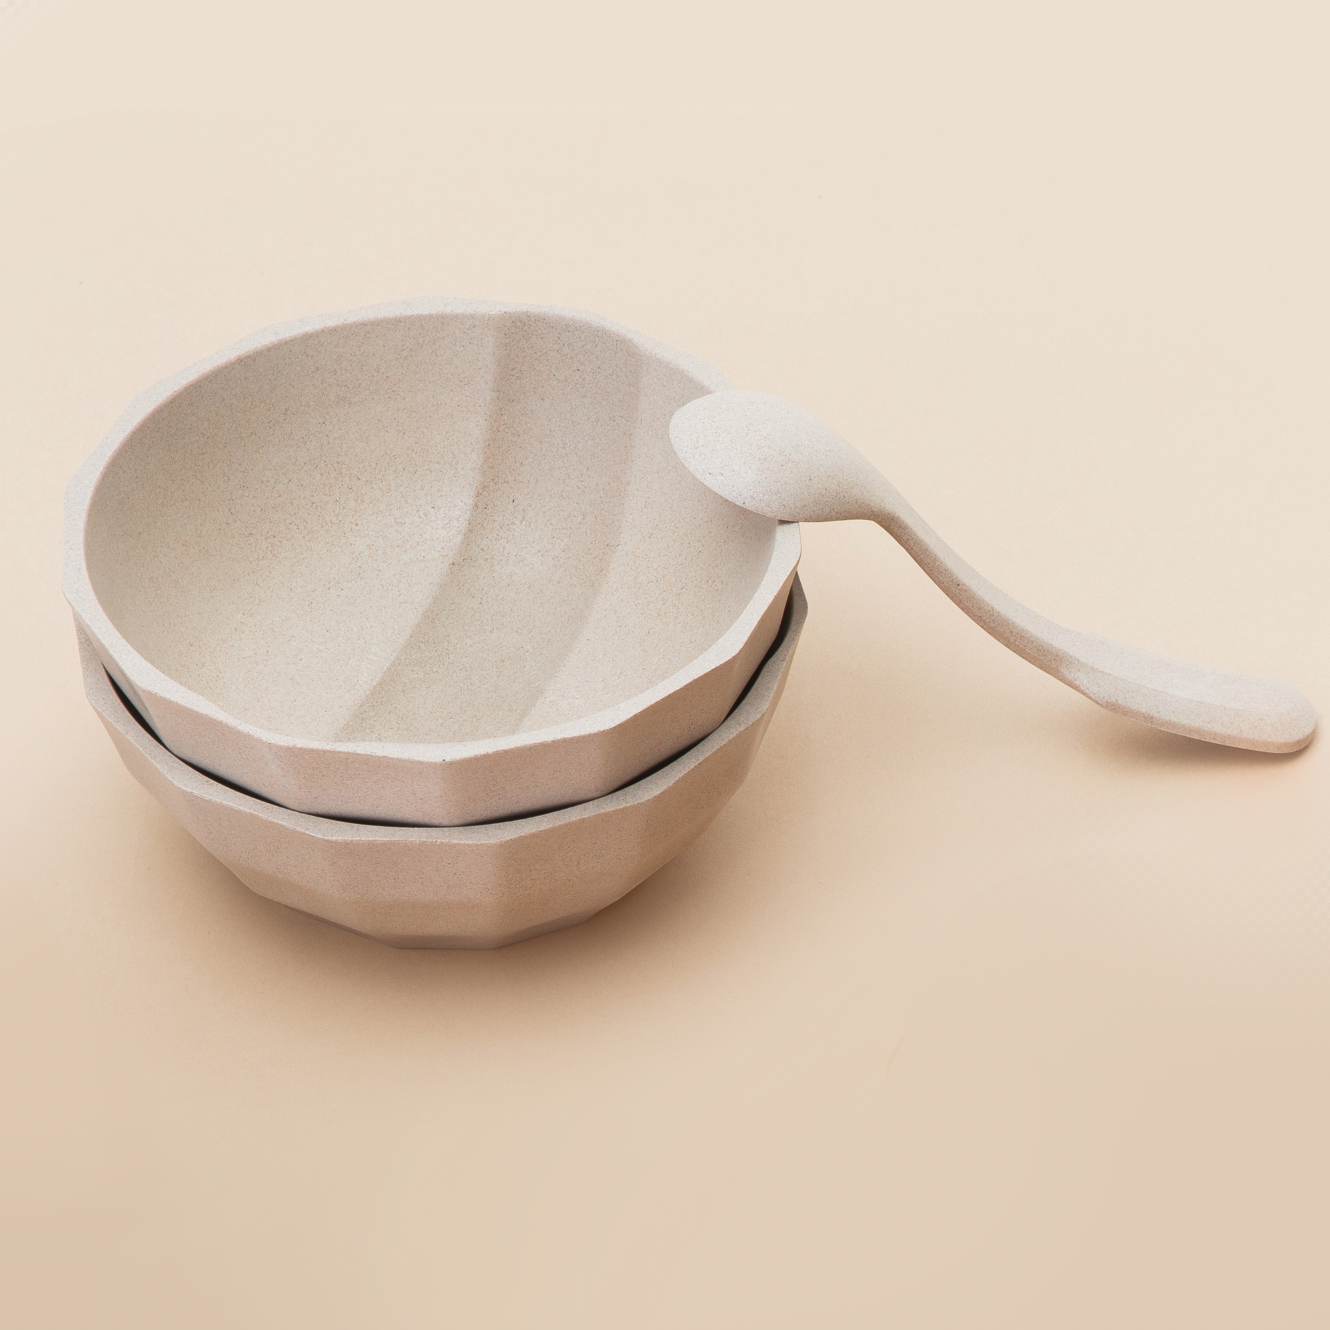 Channel Bowl Mini and Pairing Spoon | Bamboo-blend